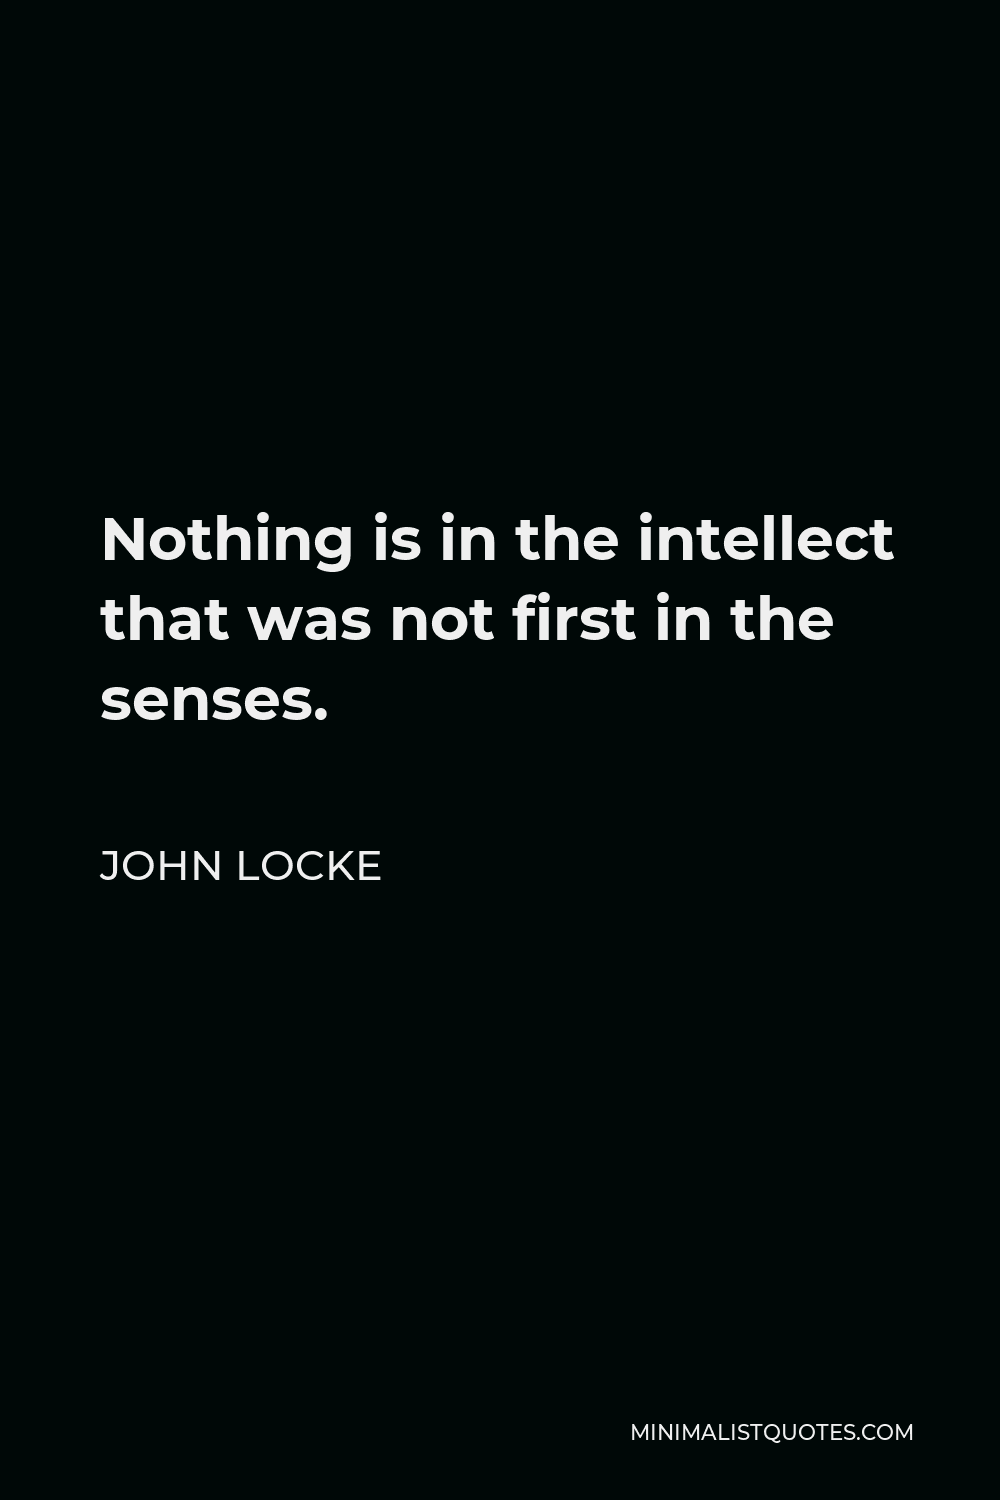 John Locke Quote - Nothing is in the intellect that was not first in the senses.